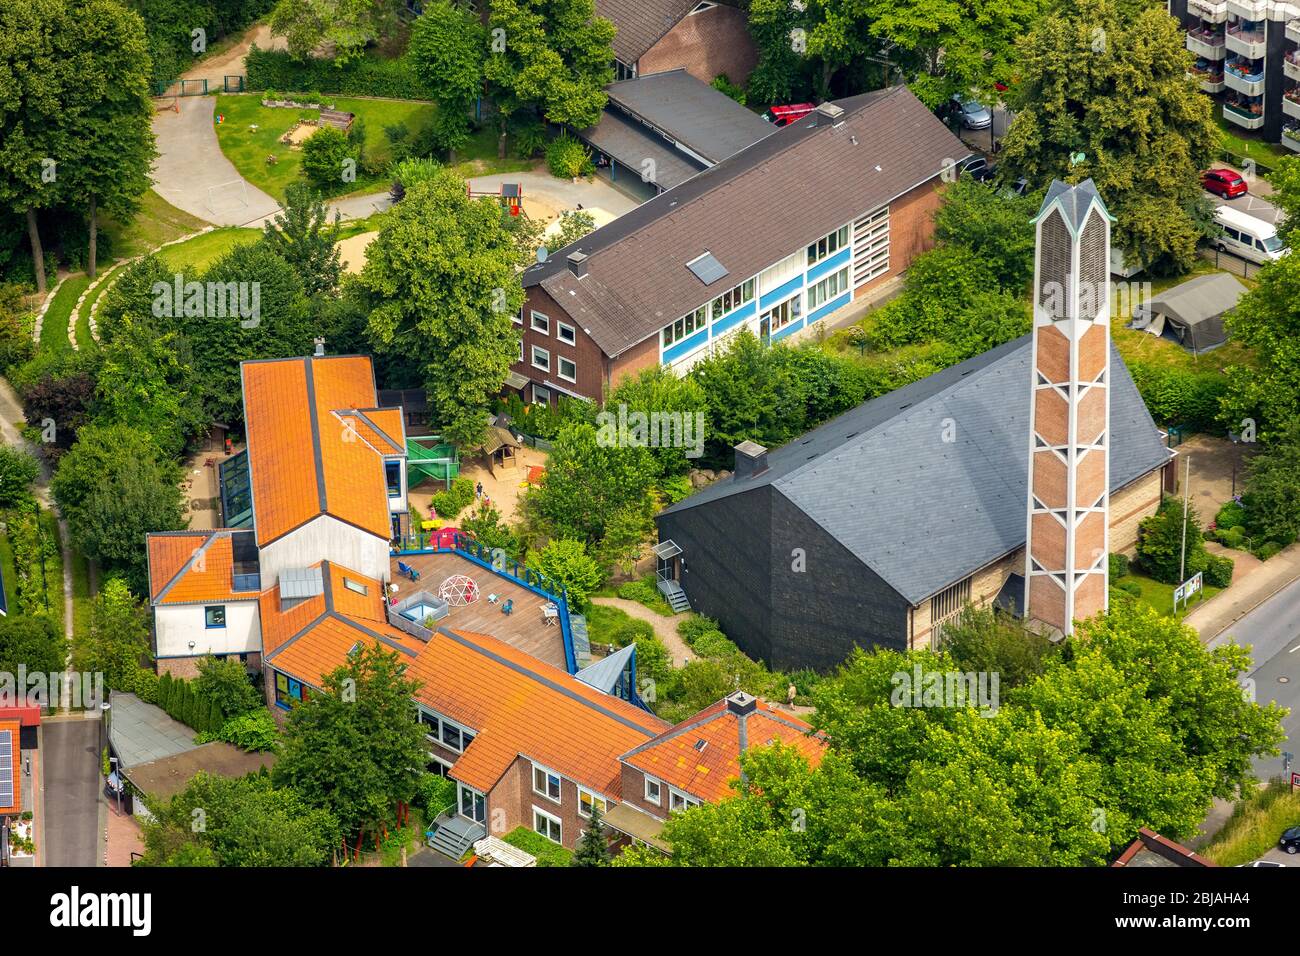 Daycare-Nursery Steppkeshaus in Heiligenhaus, in the foreground the Catholic Rectory St. Ludger, 07.07.2016, aerial view, Germany, North Rhine-Westphalia, Heiligenhaus Stock Photo